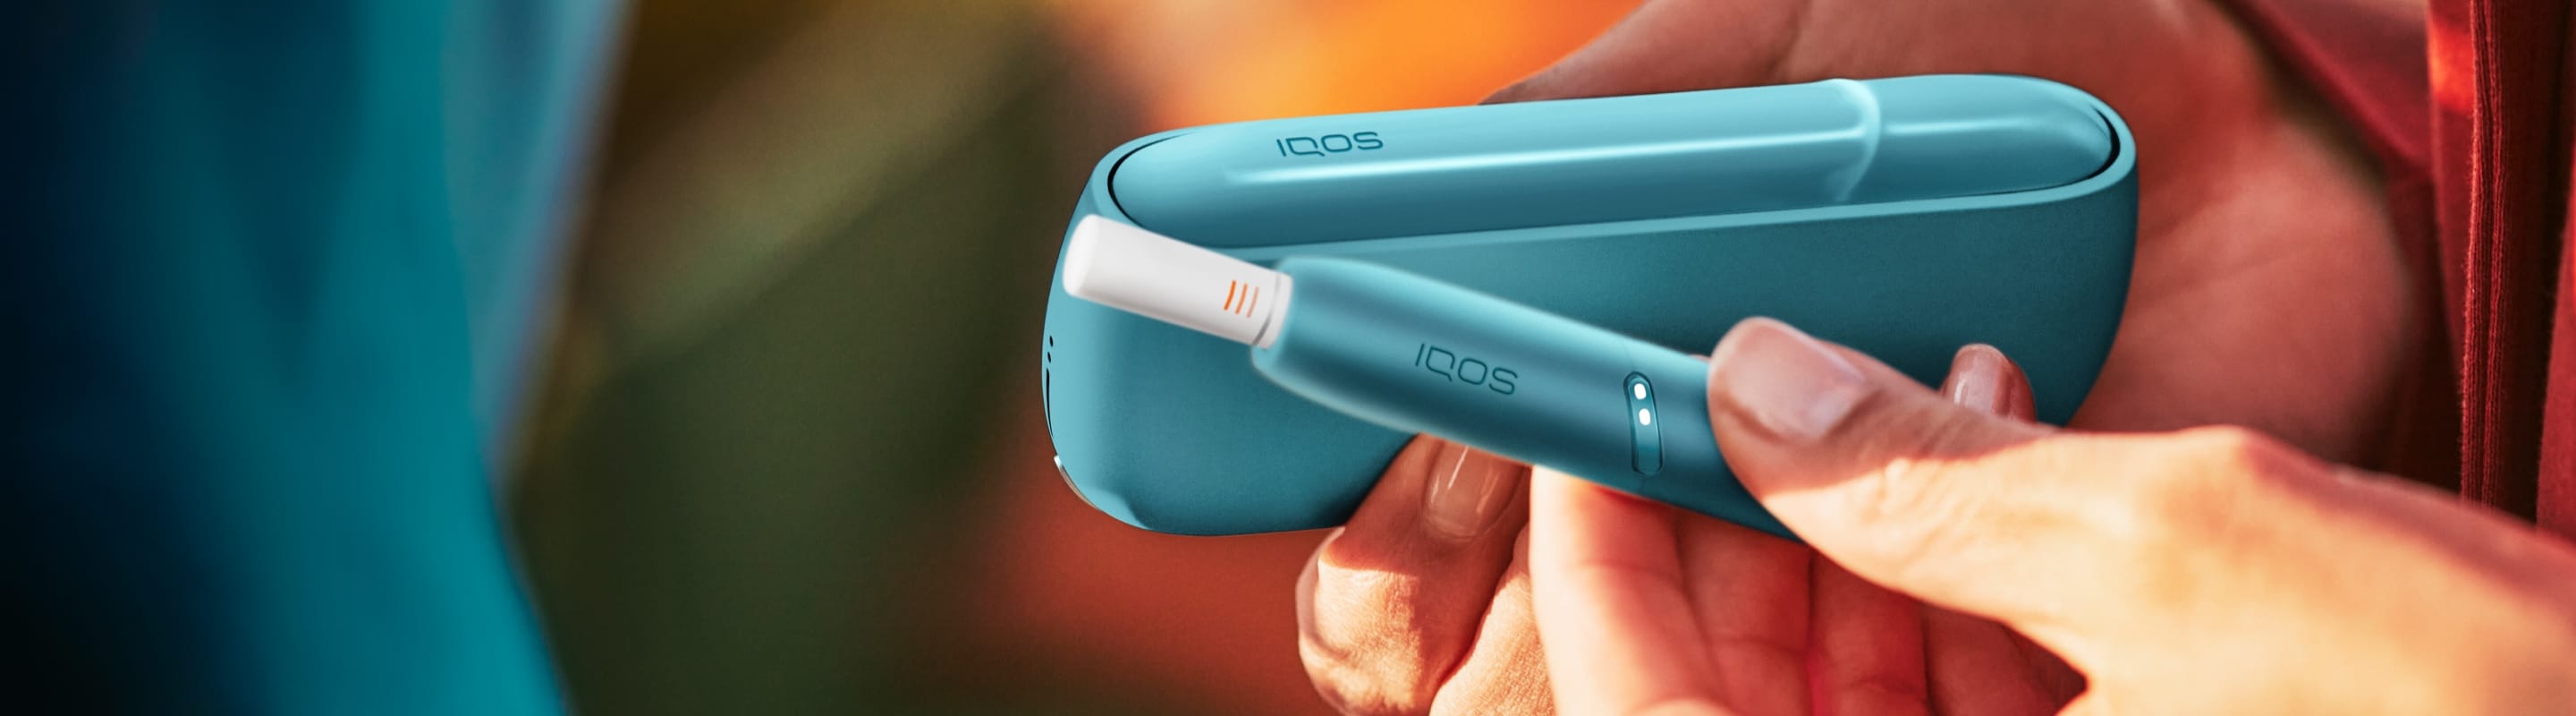 A gold IQOS device.